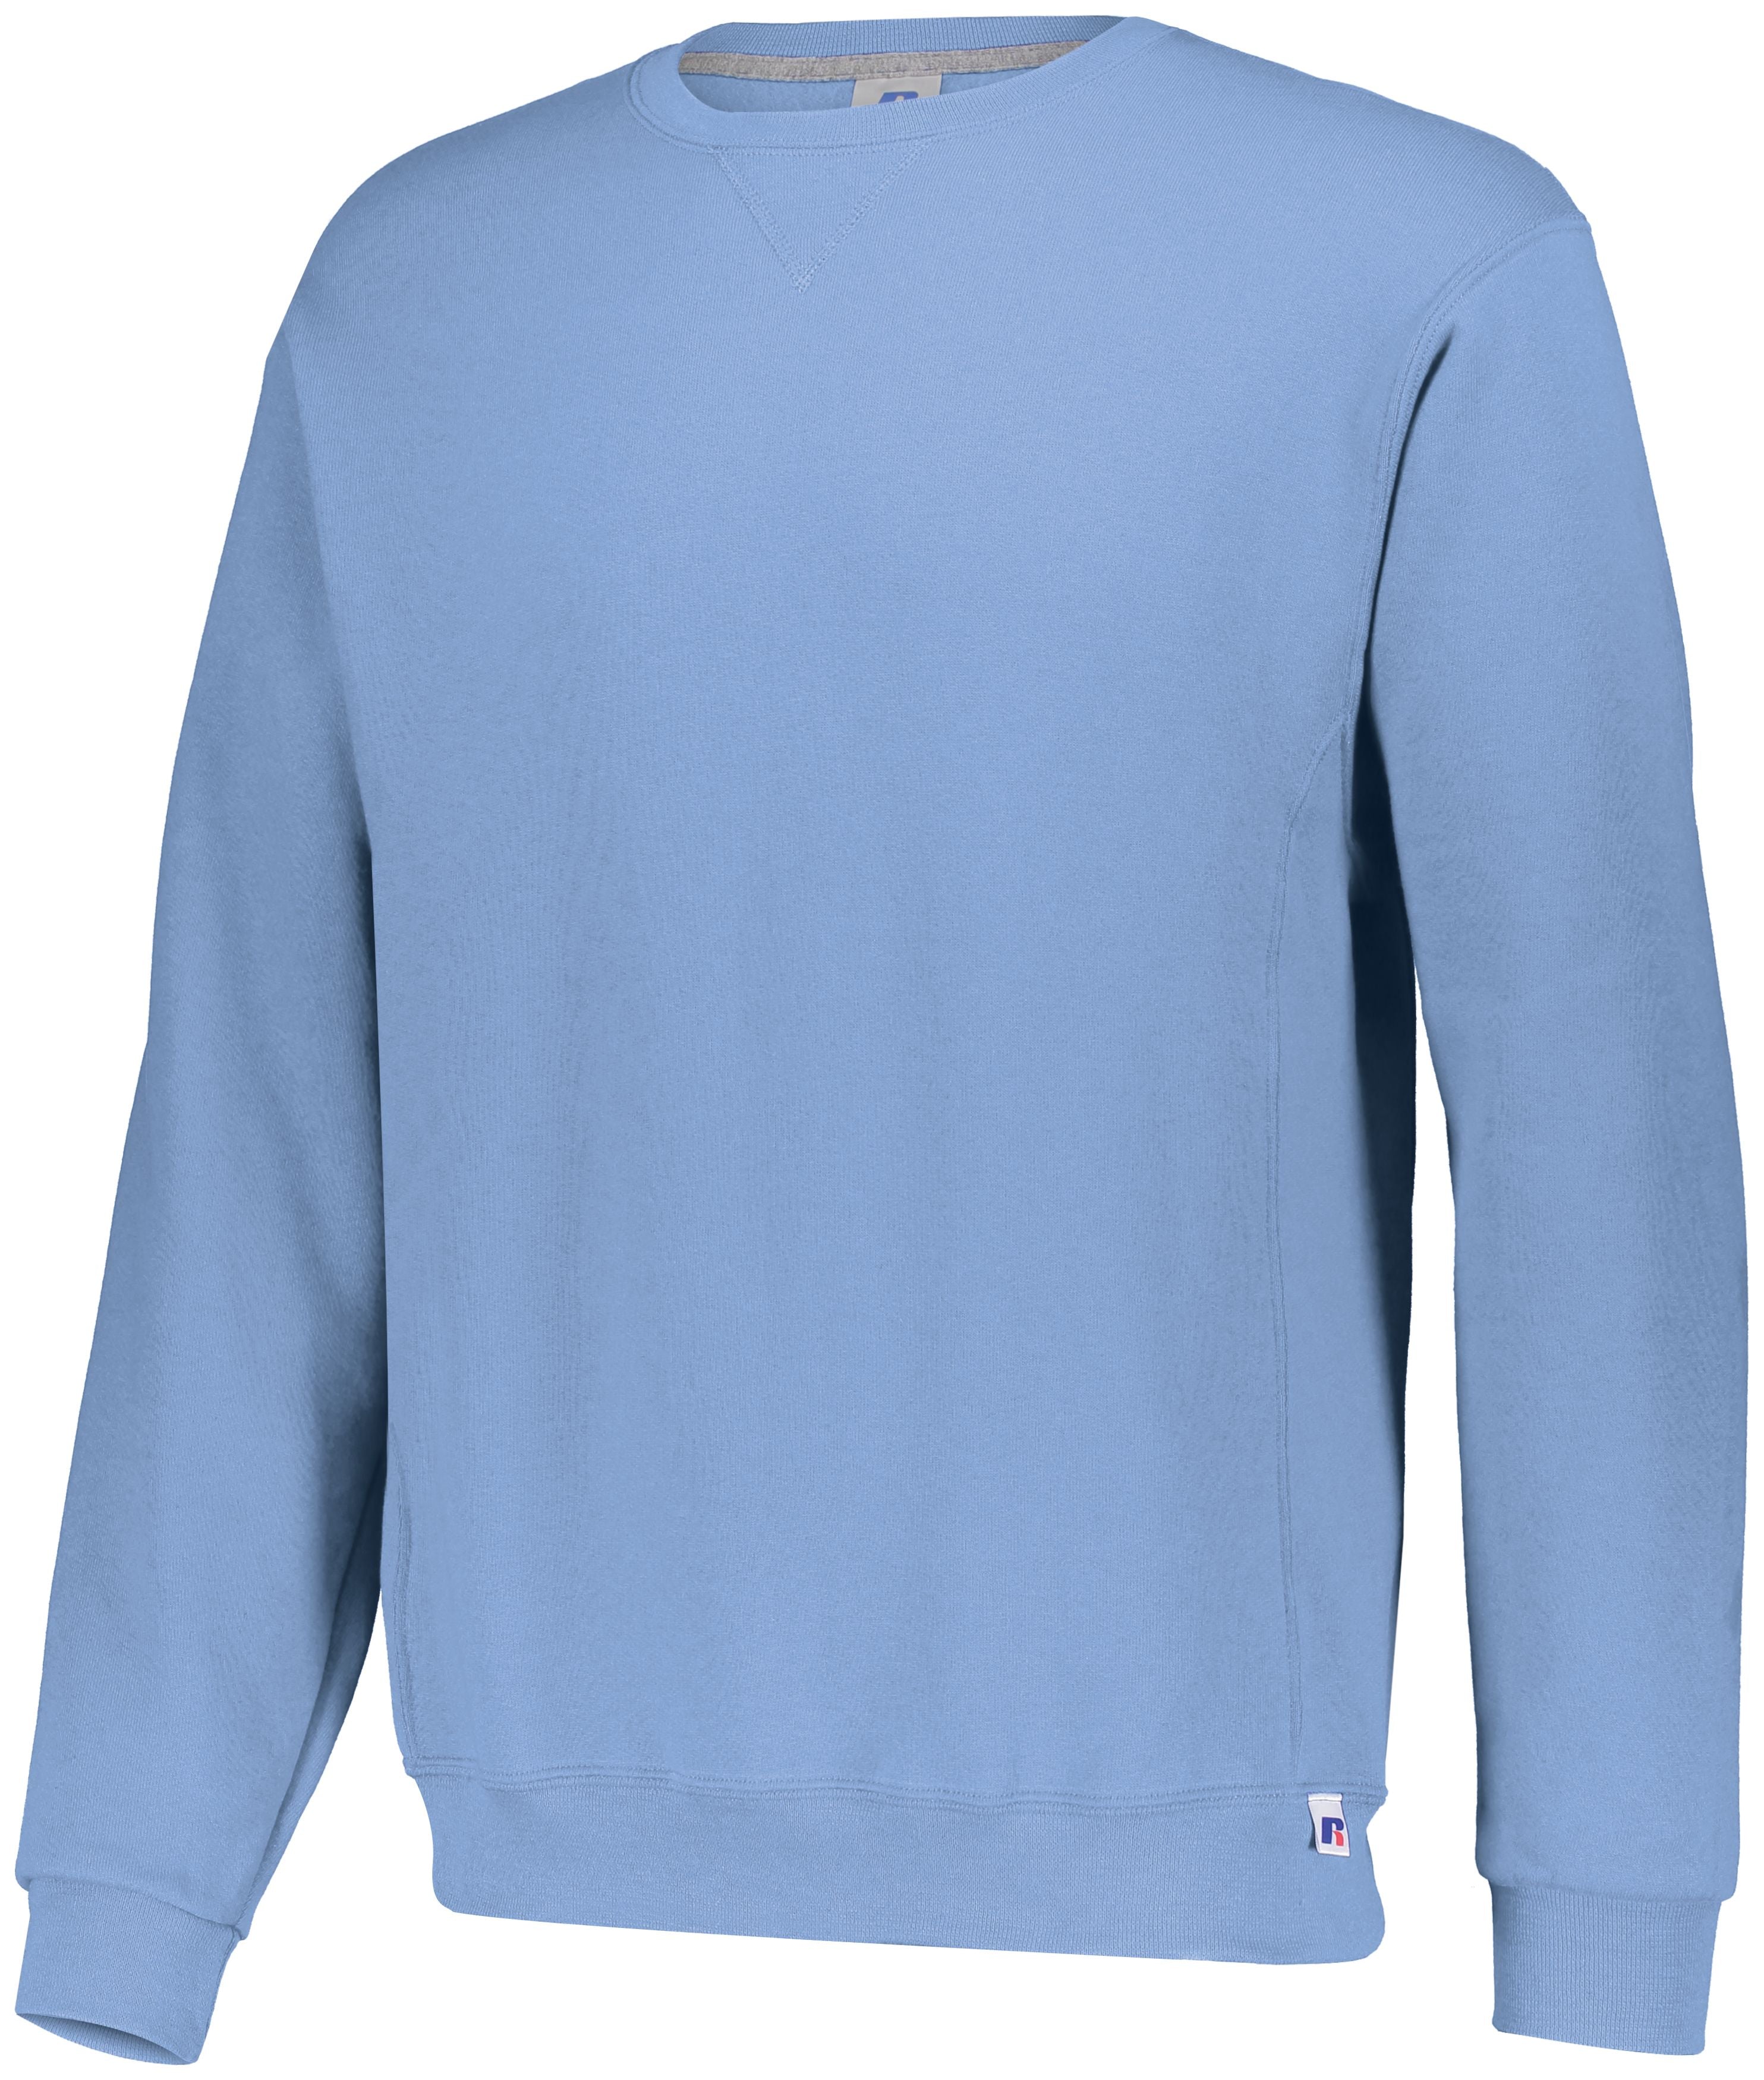 Russell Athletic Dri-Power  Fleece Crew Sweatshirt in Collegiate Blue  -Part of the Adult, Adult-Sweatshirt, Russell-Athletic-Products, Outerwear product lines at KanaleyCreations.com